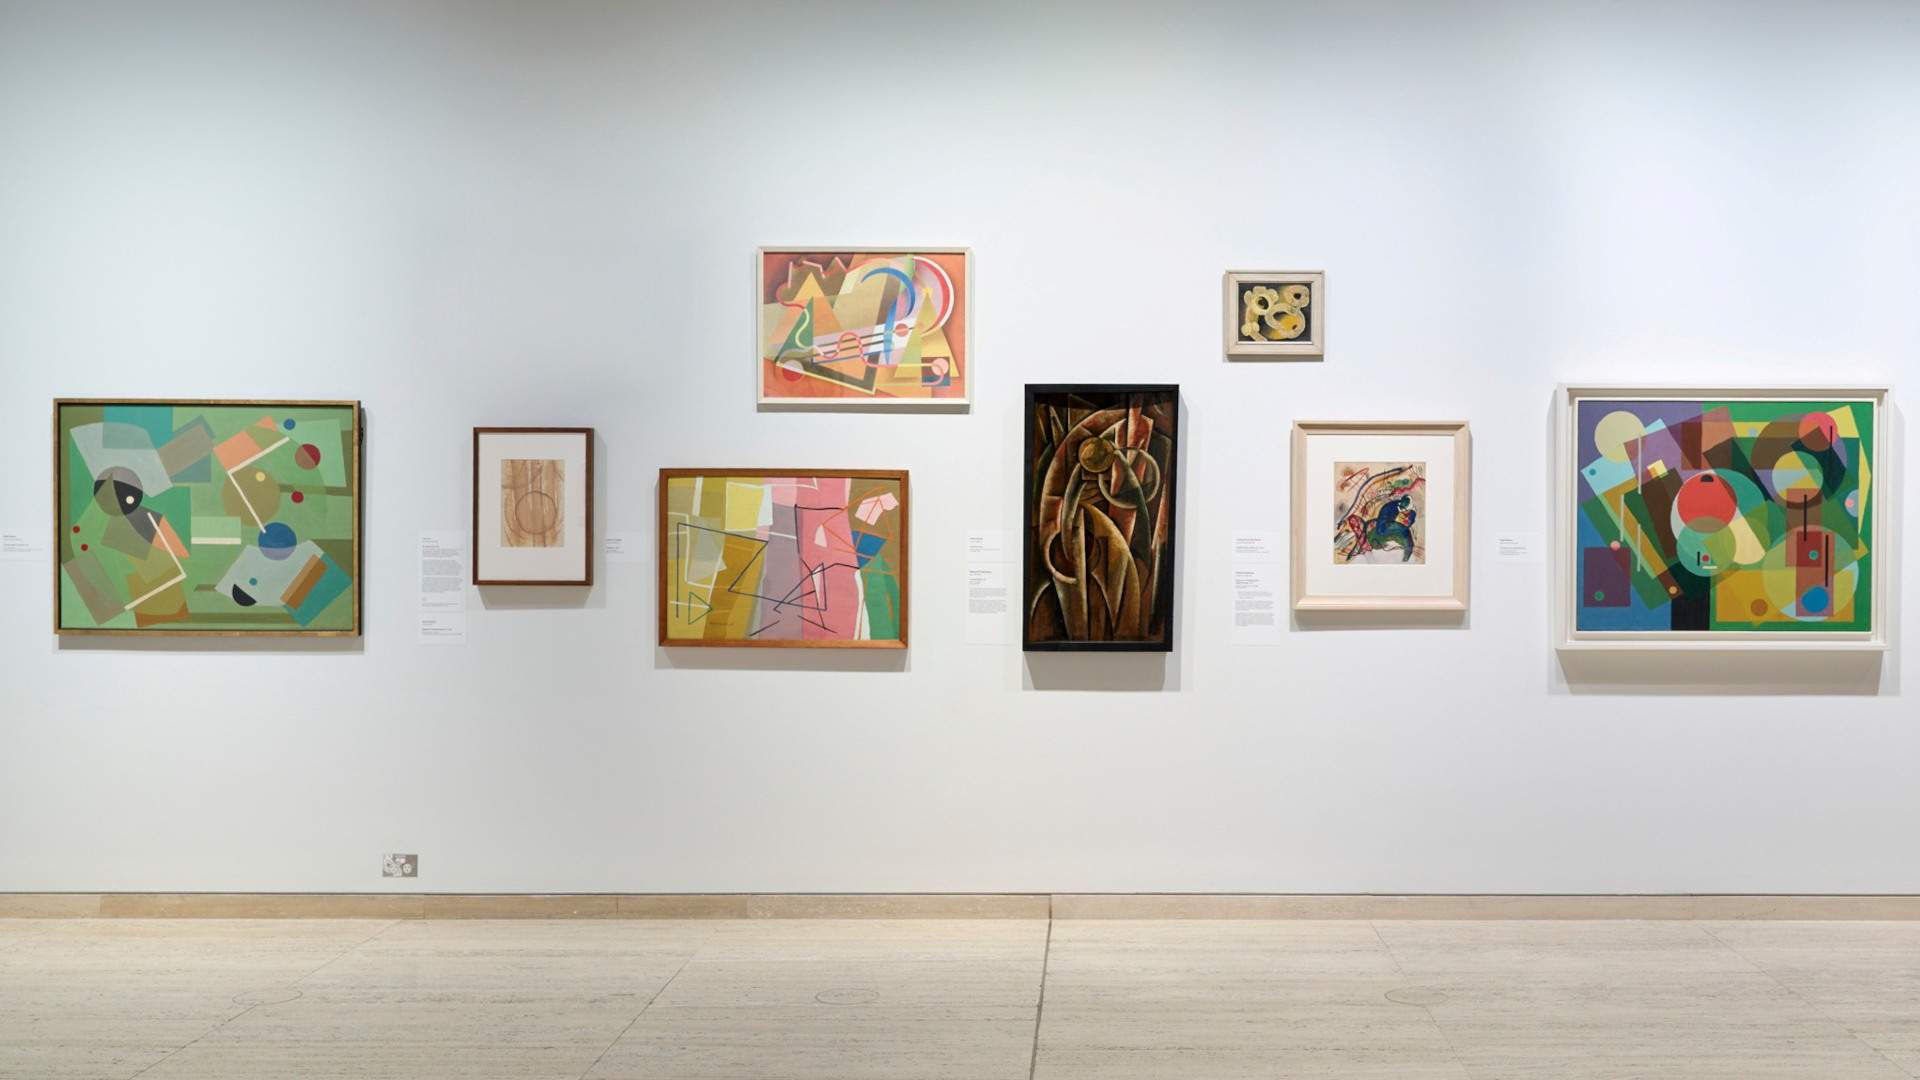 The Art Gallery of NSW Has Reopened Its 20th-Century Gallery in a Newly Refurbished Space